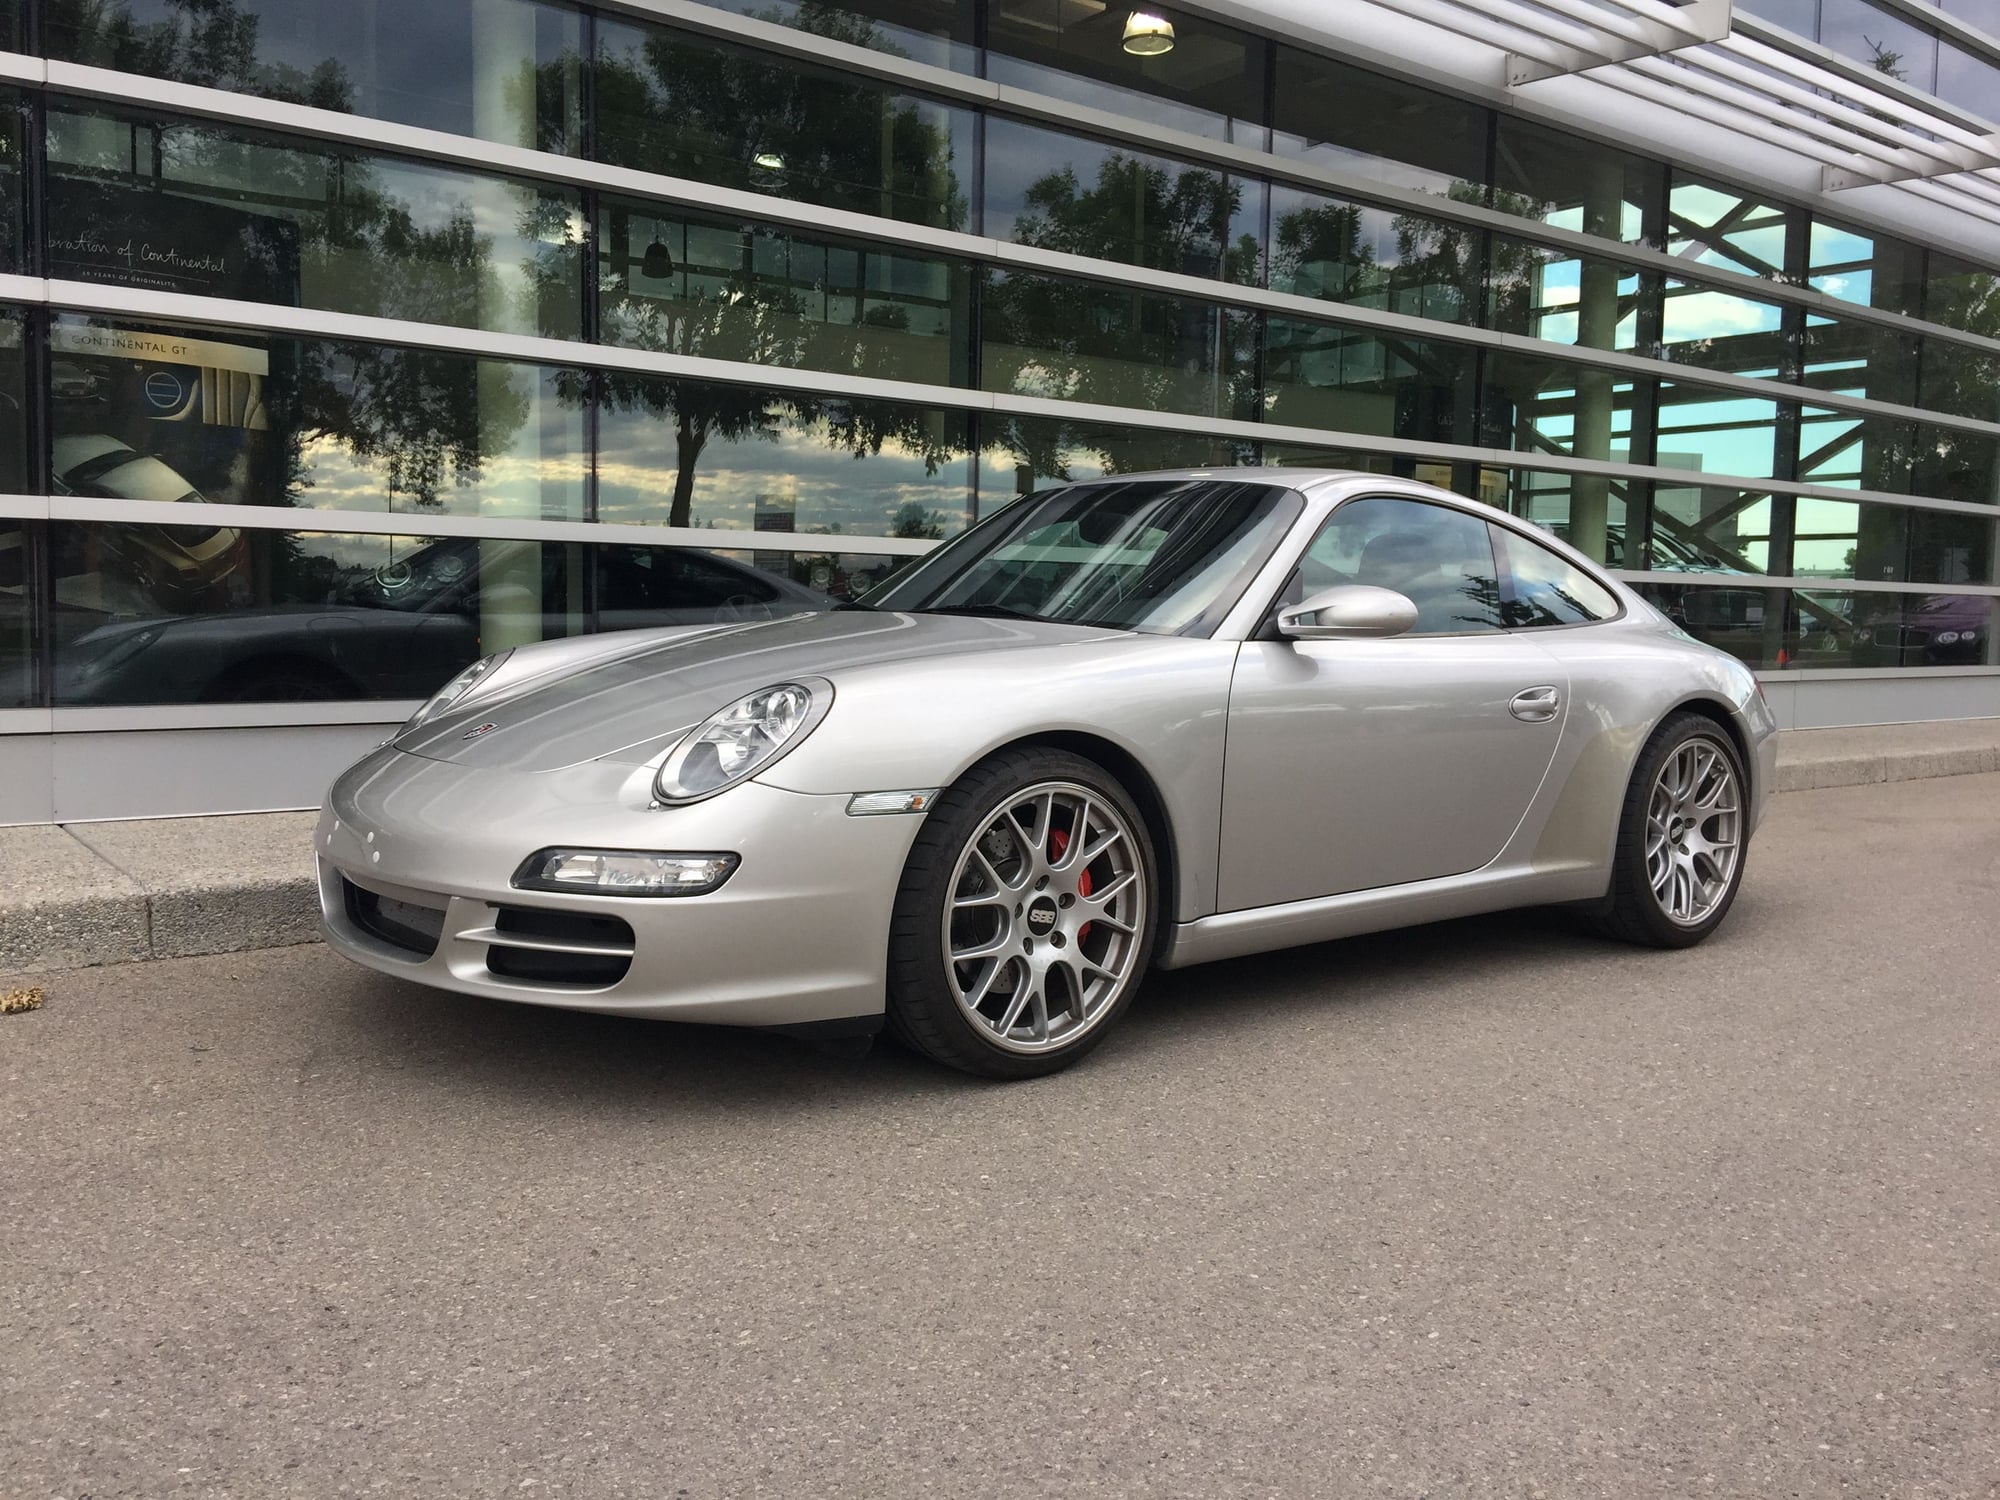 2005 Porsche 911 - 2005 Porsche Carrera S for Sale - Used - VIN WP0AB29935S742481 - 6 cyl - 2WD - Manual - Coupe - Silver - Calgary, AB T3H5Z1, Canada